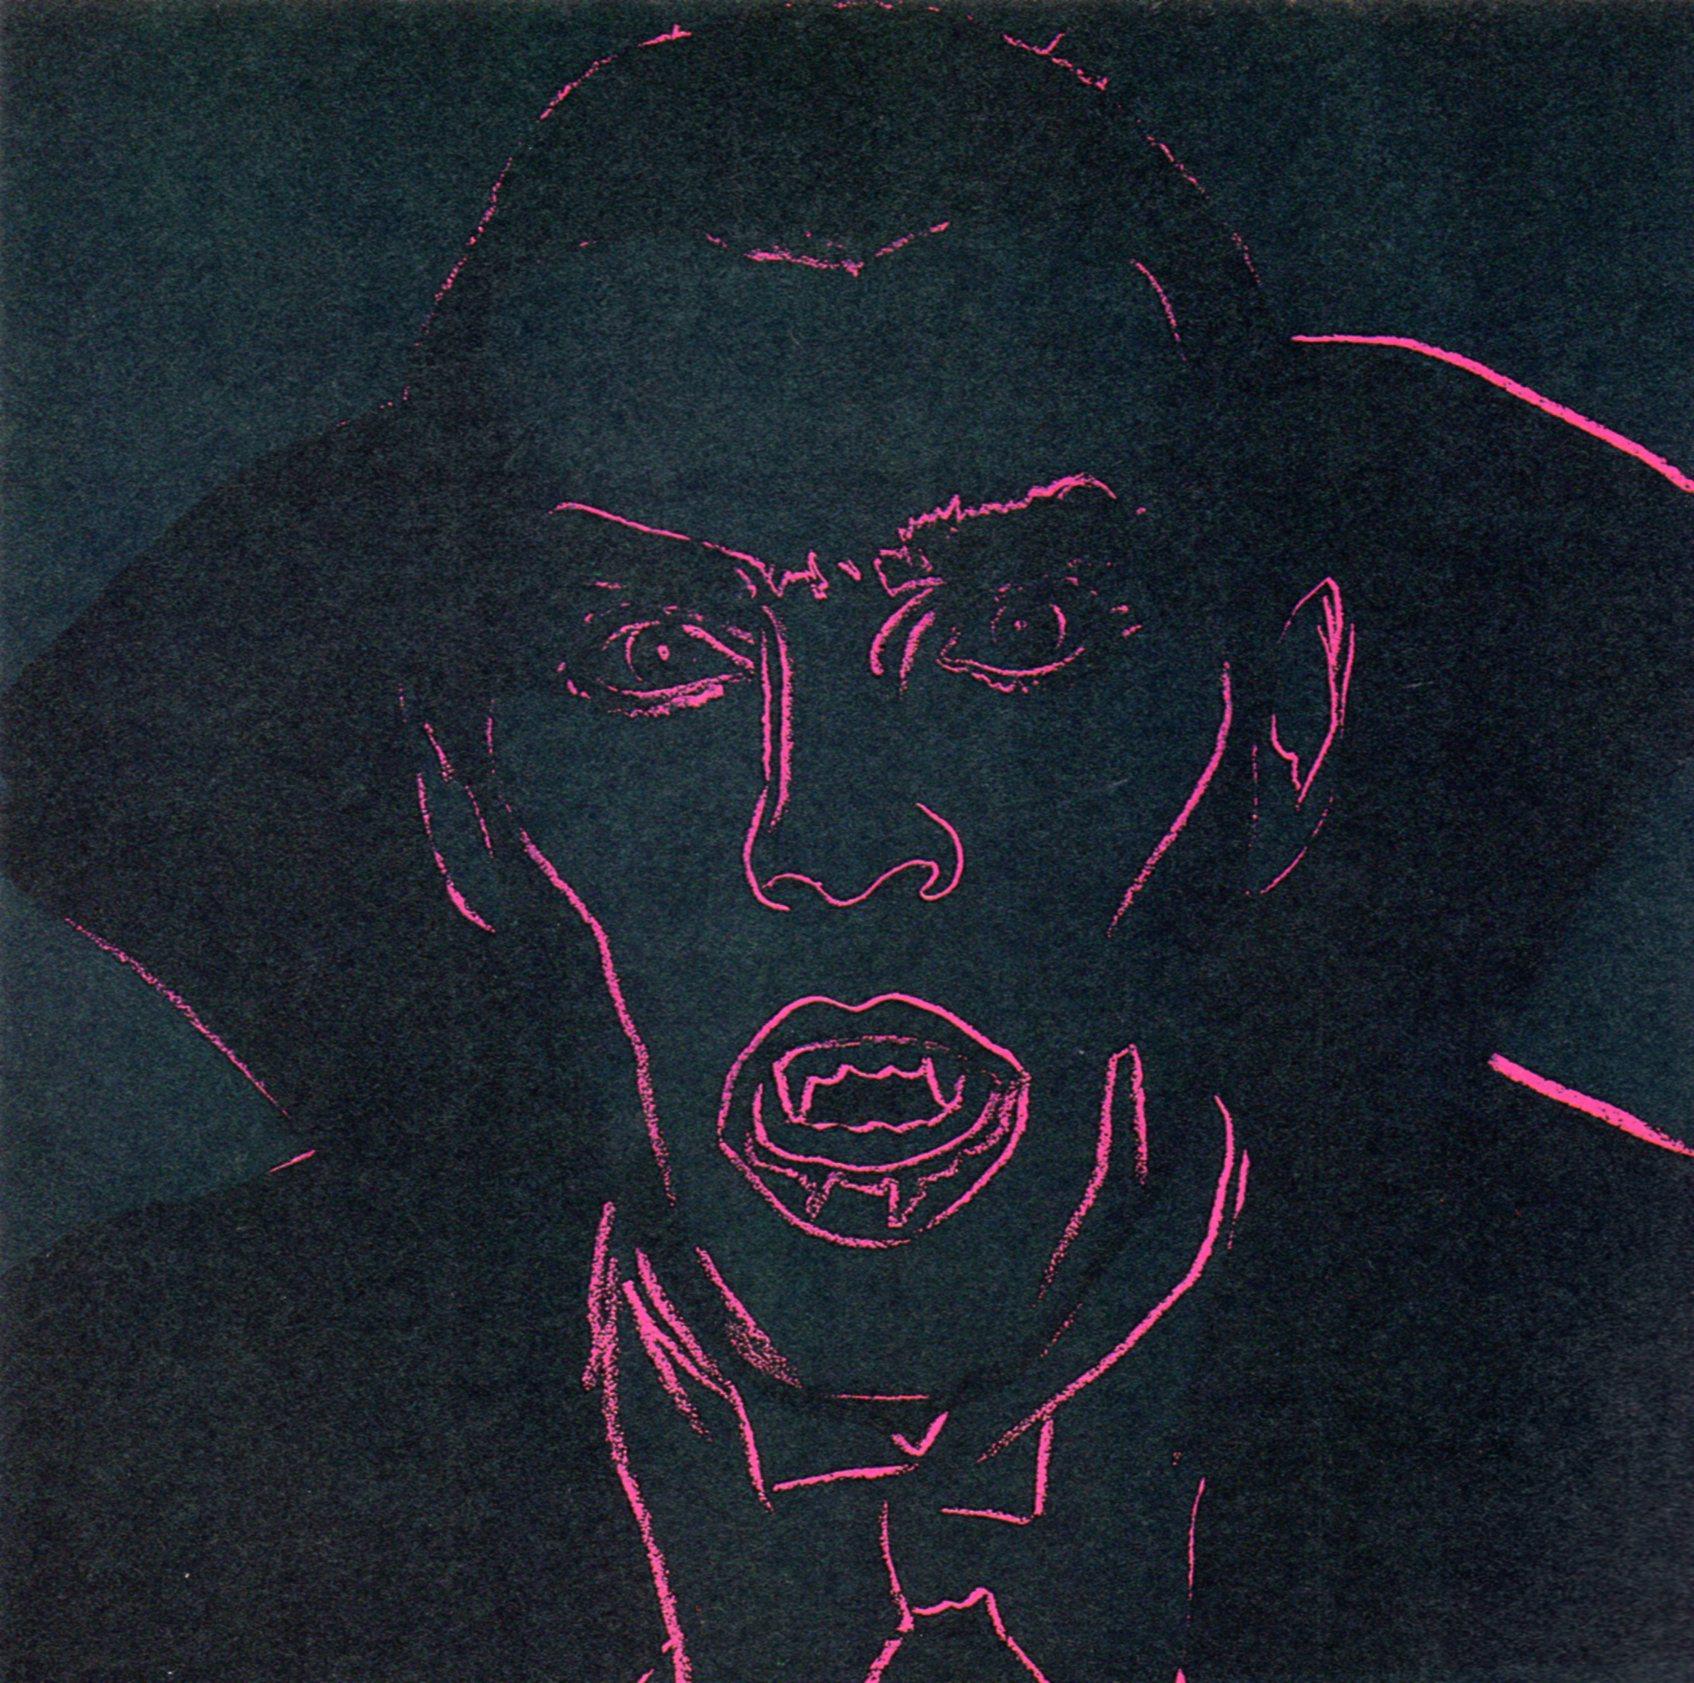 Andy Warhol Myths (portfolio of ten announcement cards)  - Black Portrait Print by (after) Andy Warhol